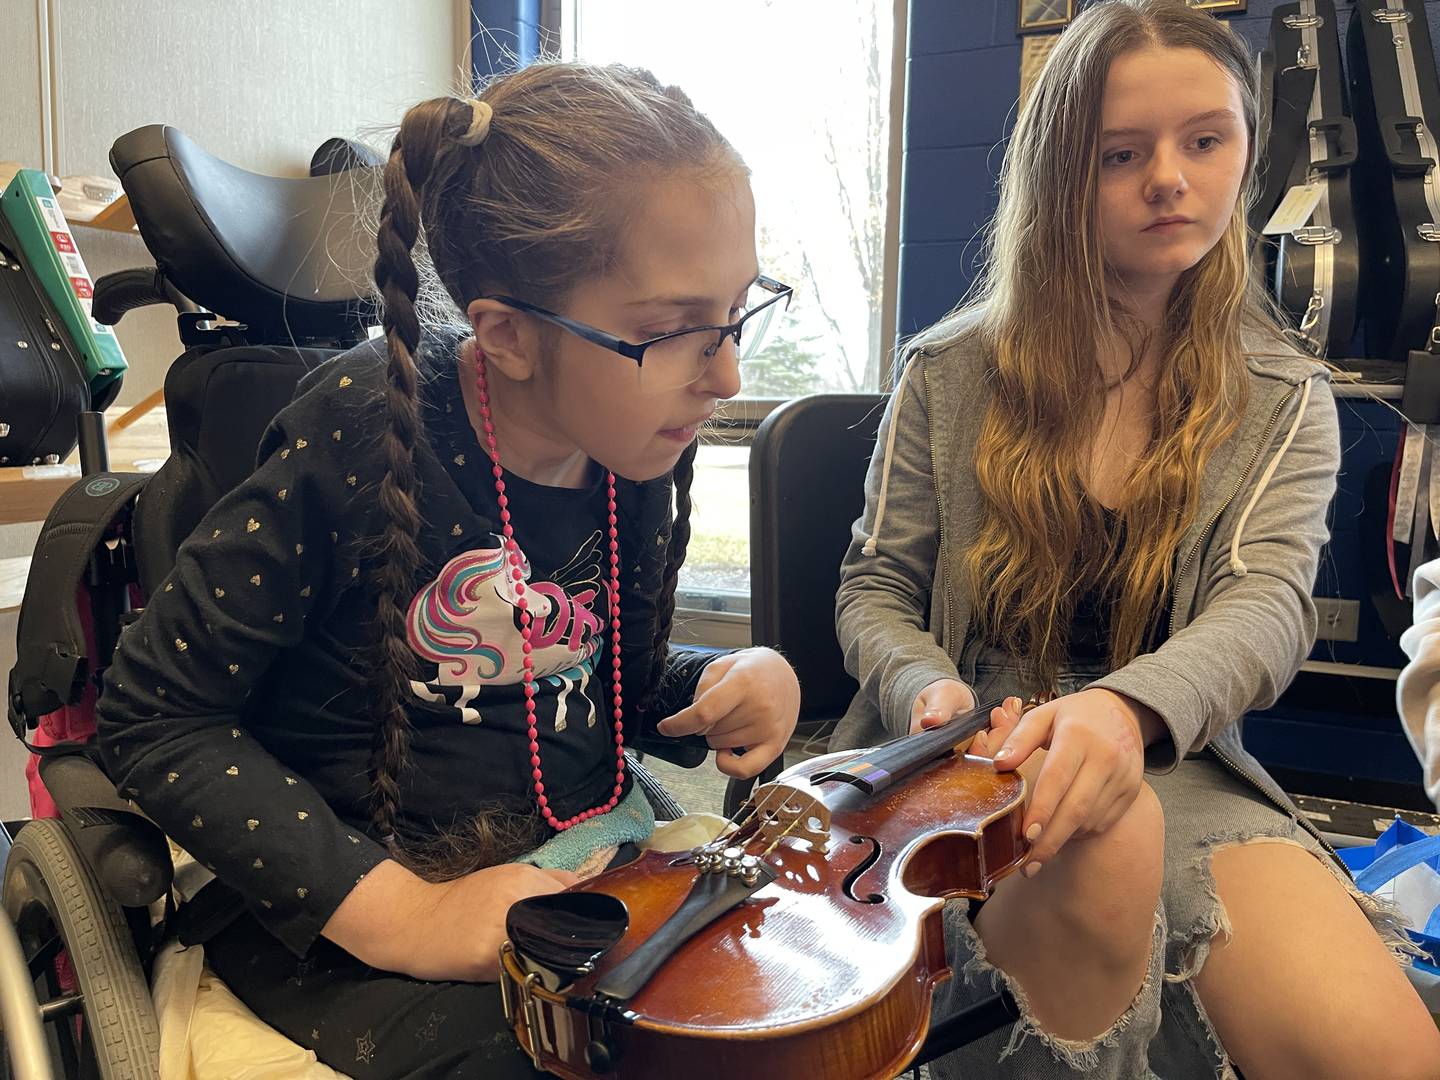 Karissa Ulsaver (right) guides Liezl Eternick (left) in playing the violin on Friday, Jan. 13, 2023, at Creekside Middle School, as part of the United Sound program. United Sound is geared toward removing social barriers through music. At Creekside, it provides students in special education the opportunity to learn how to play while receiving social interaction.